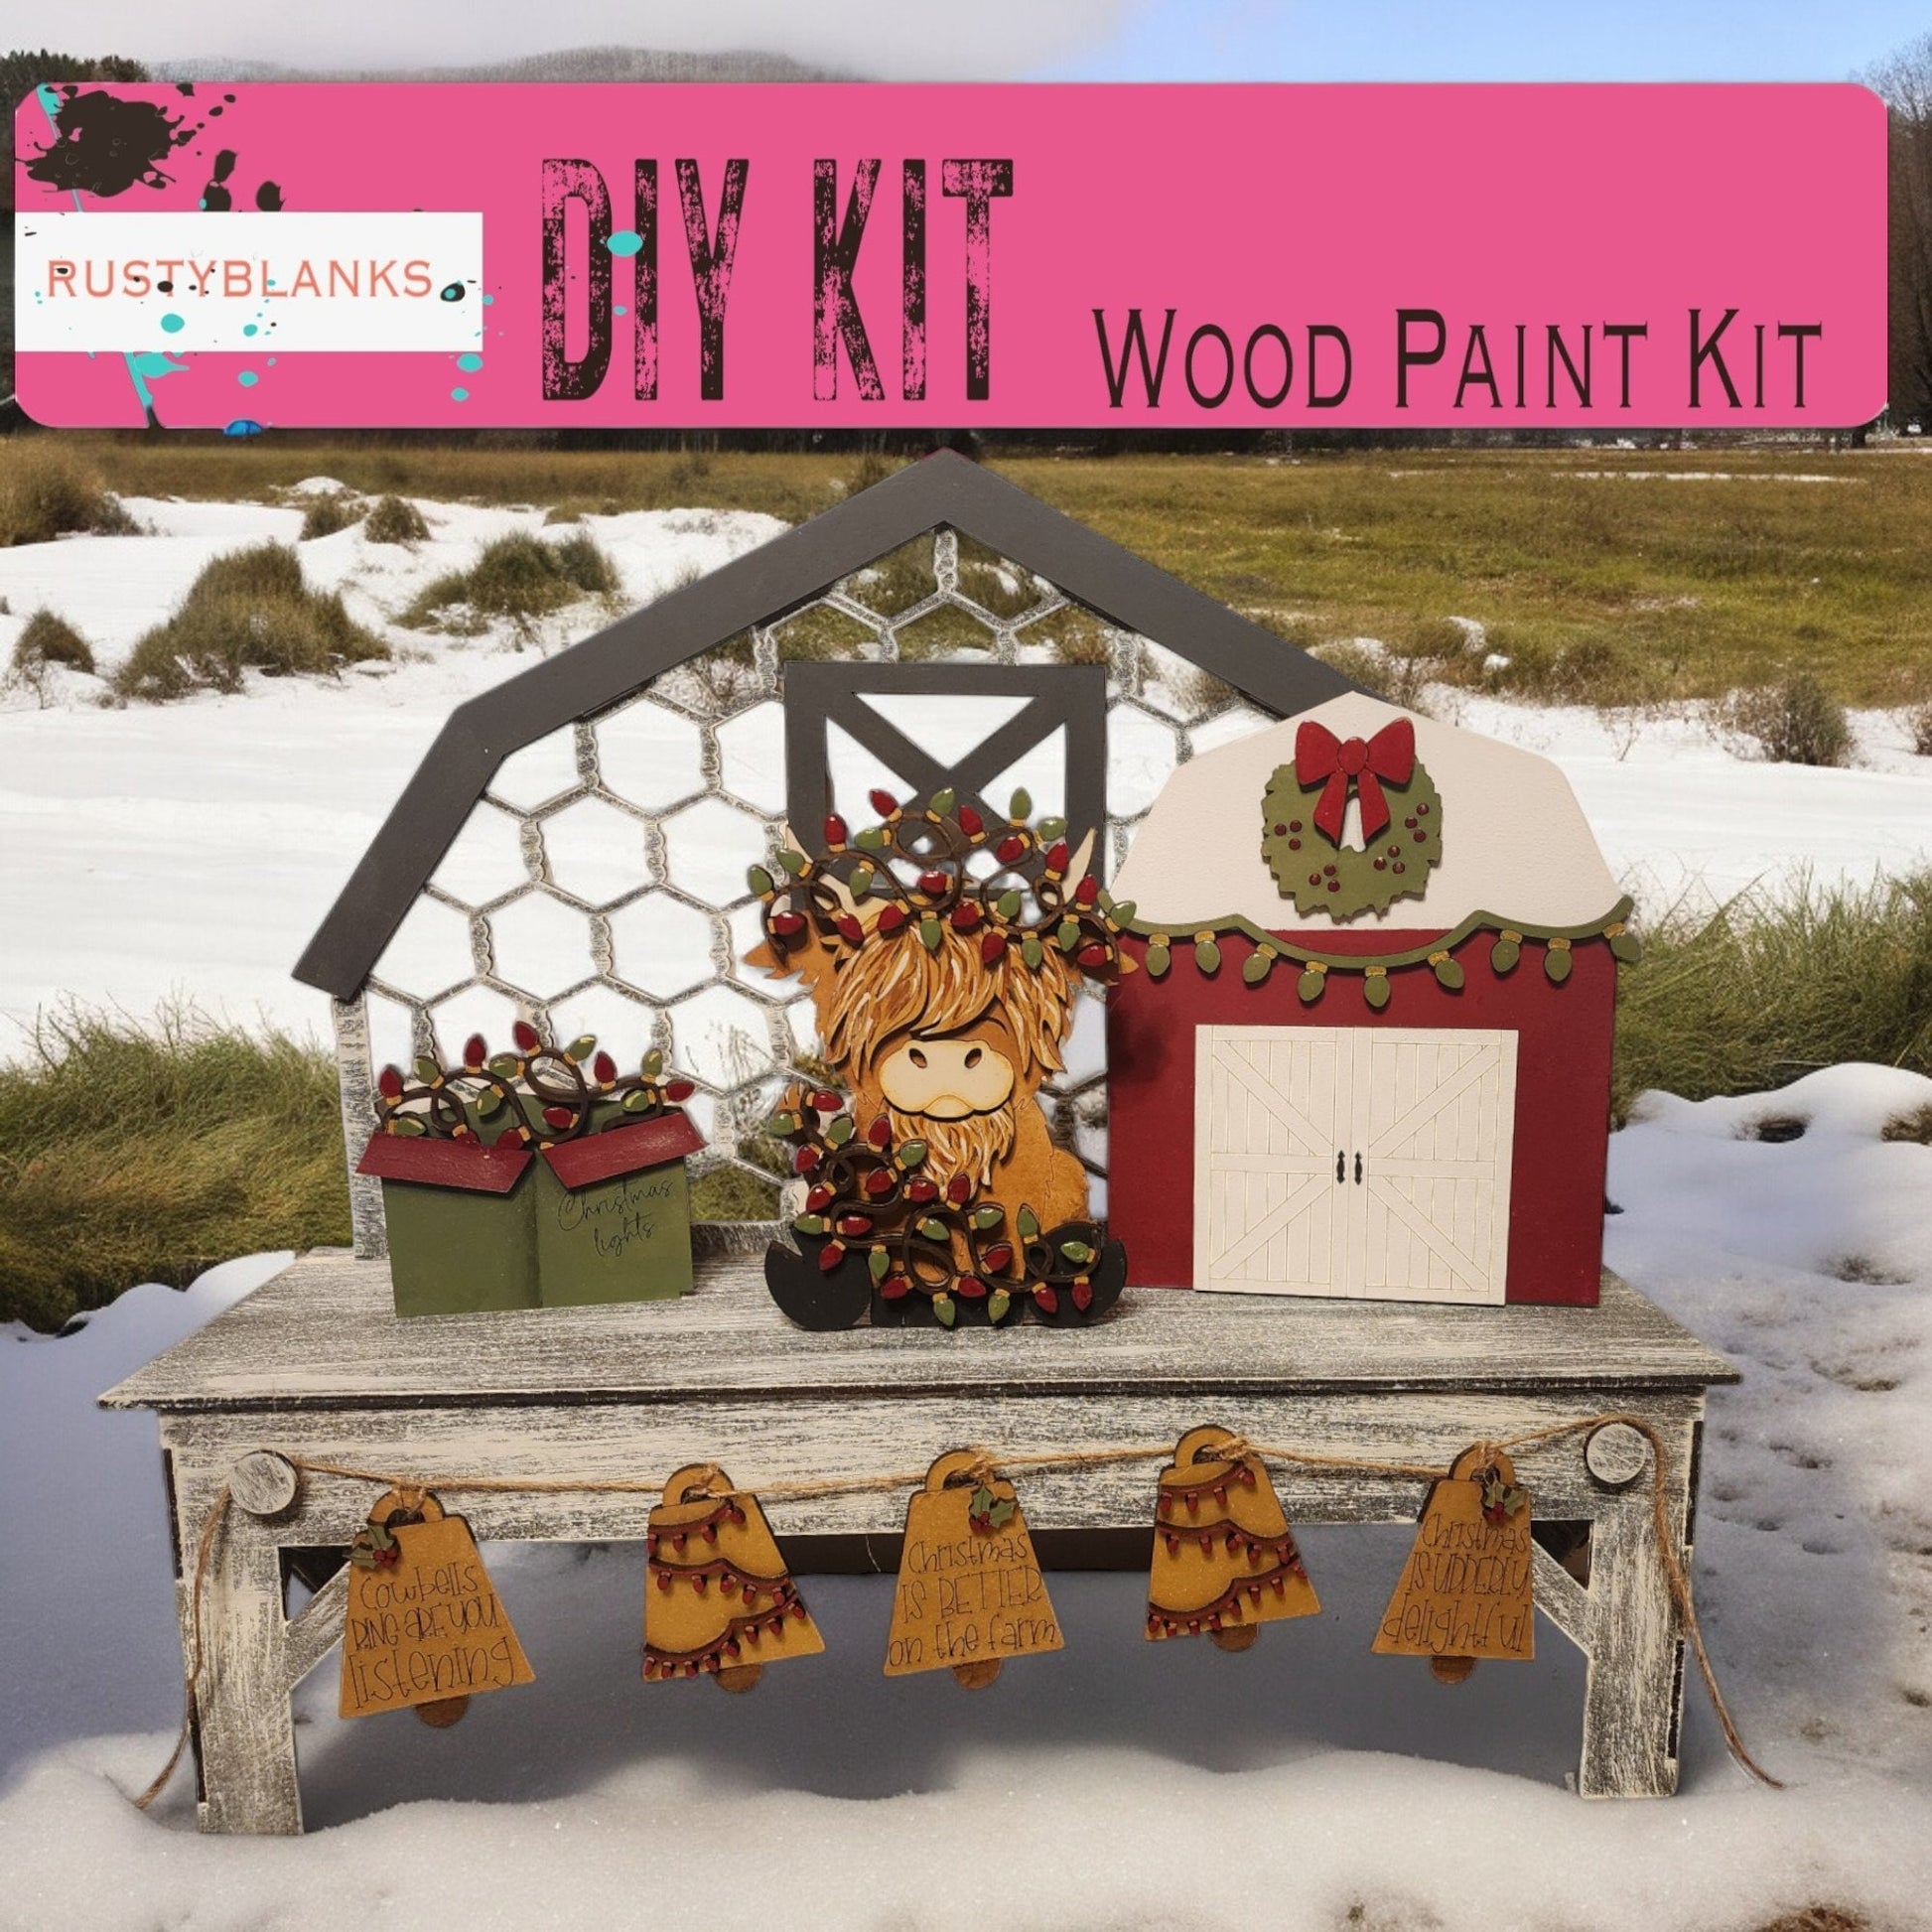 a picture of a wooden paint kit in the snow